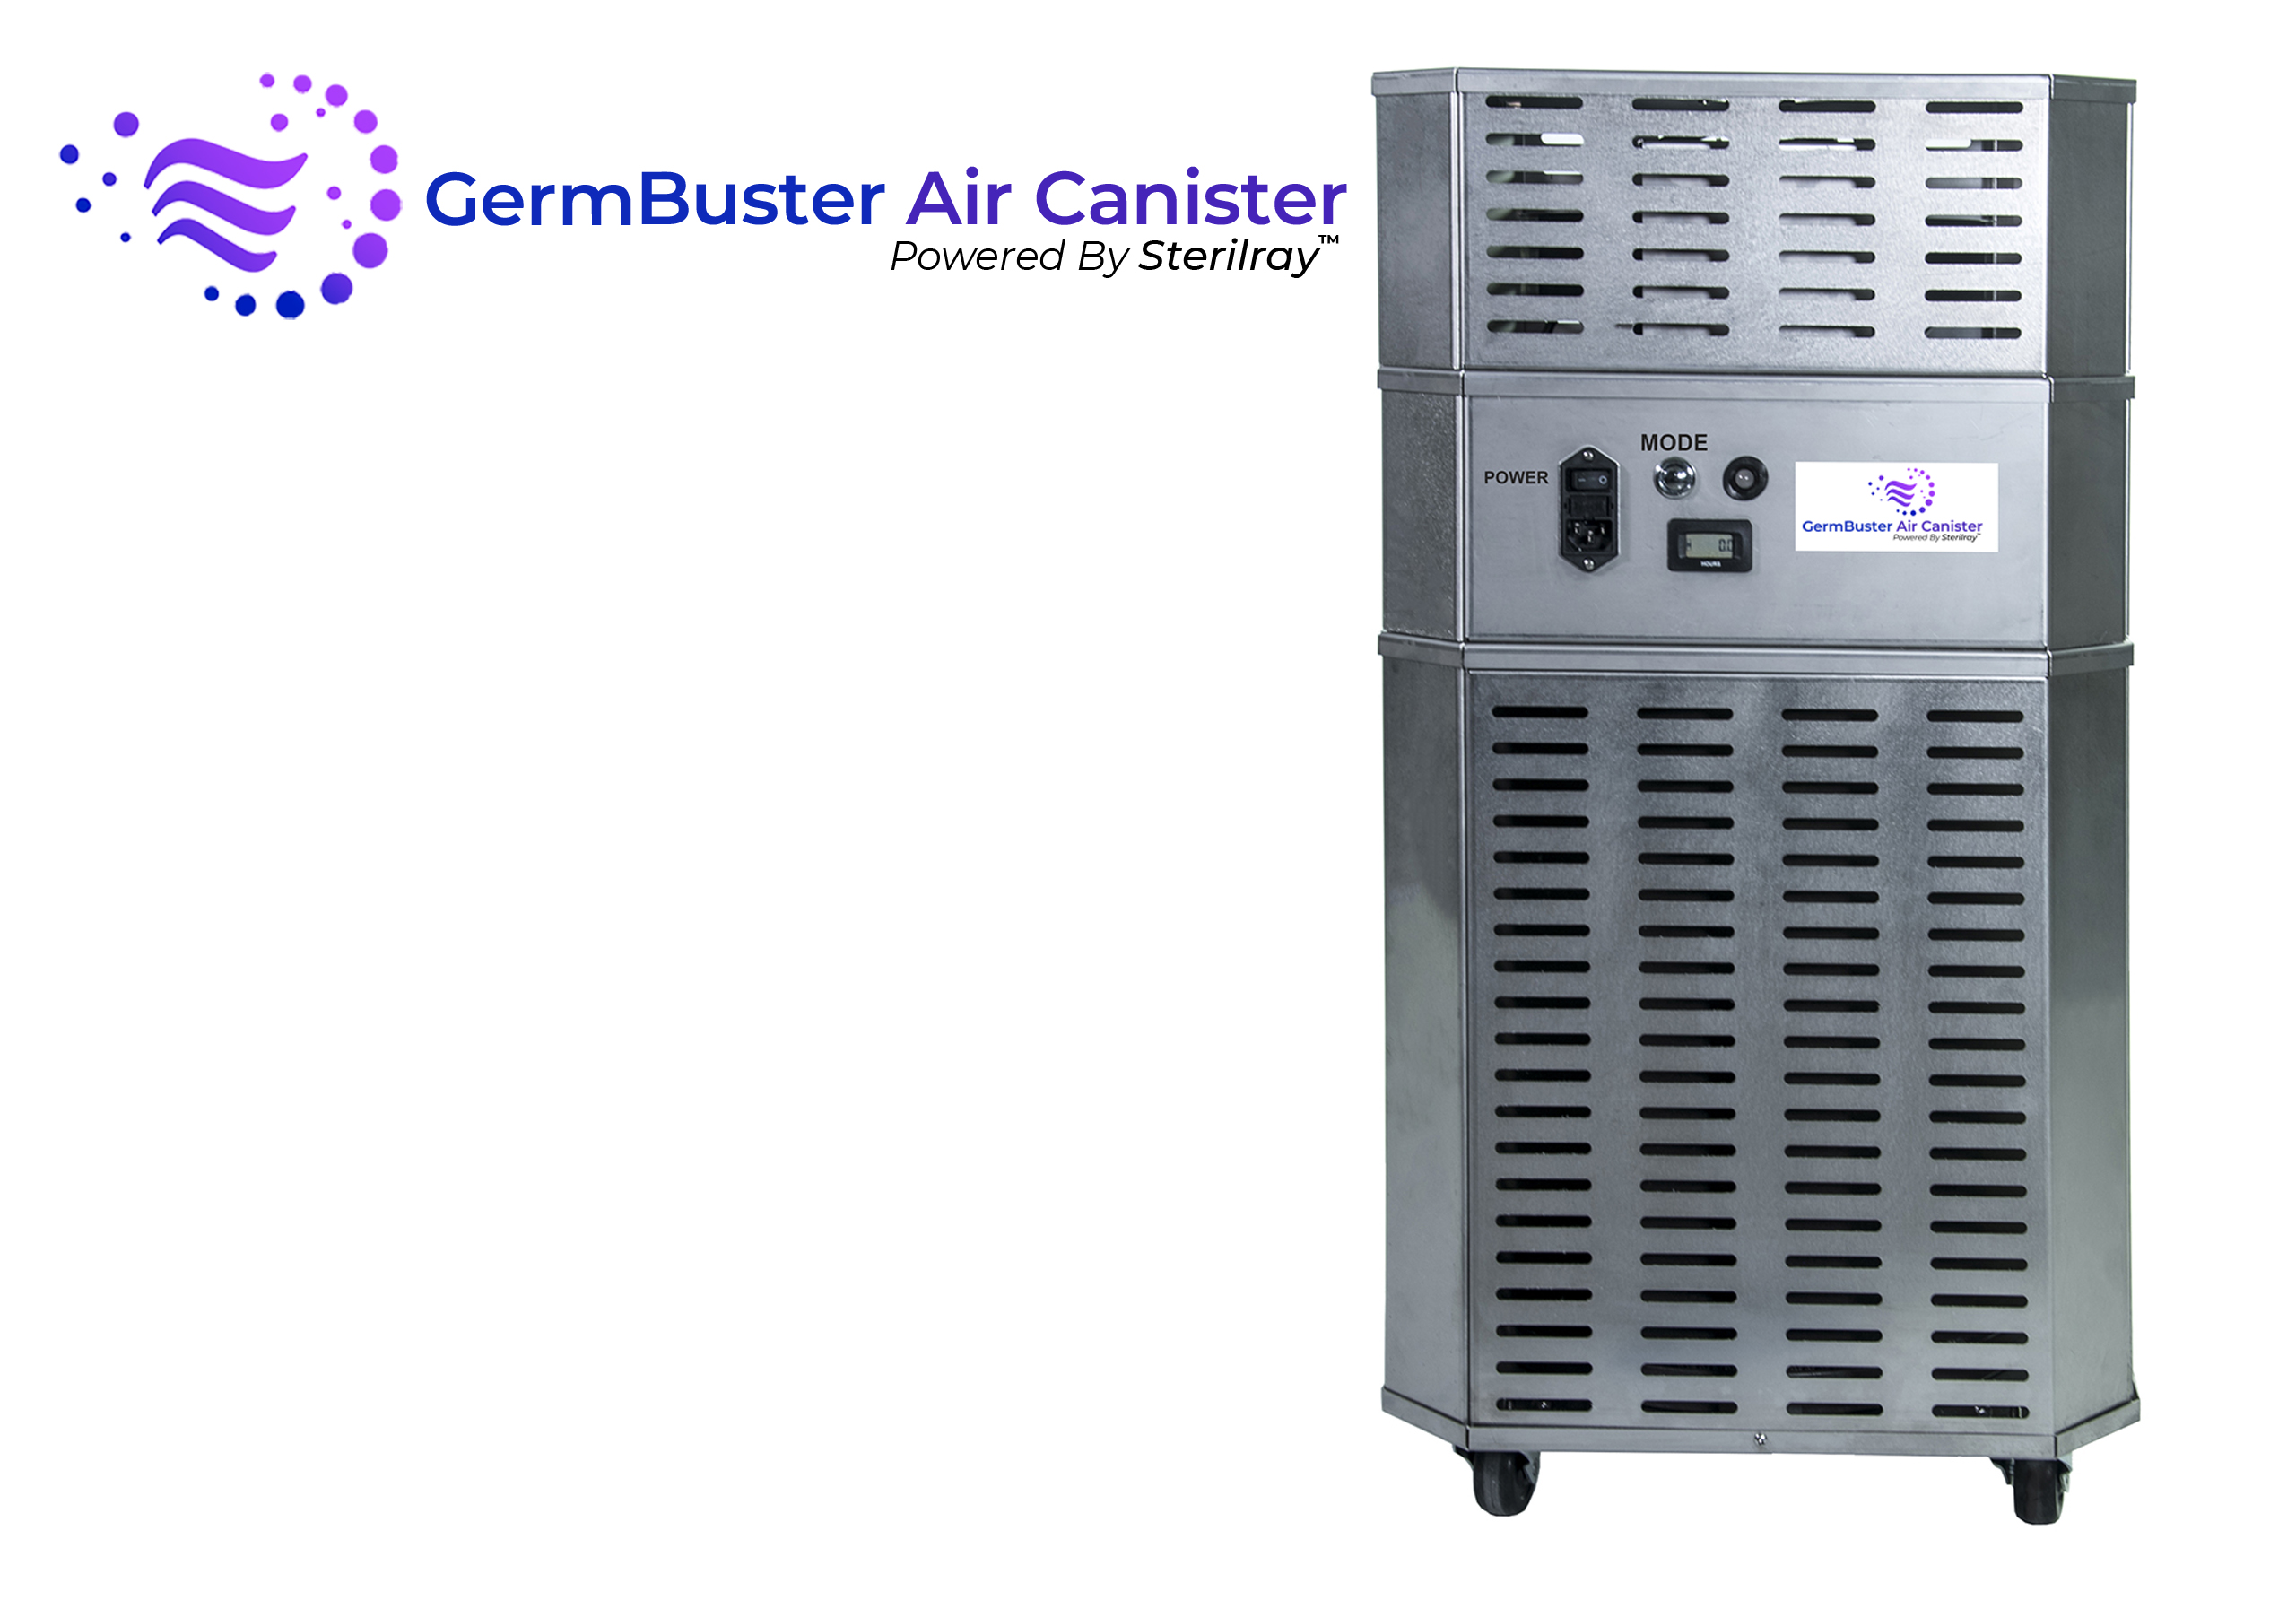 GermBuster Air Canister